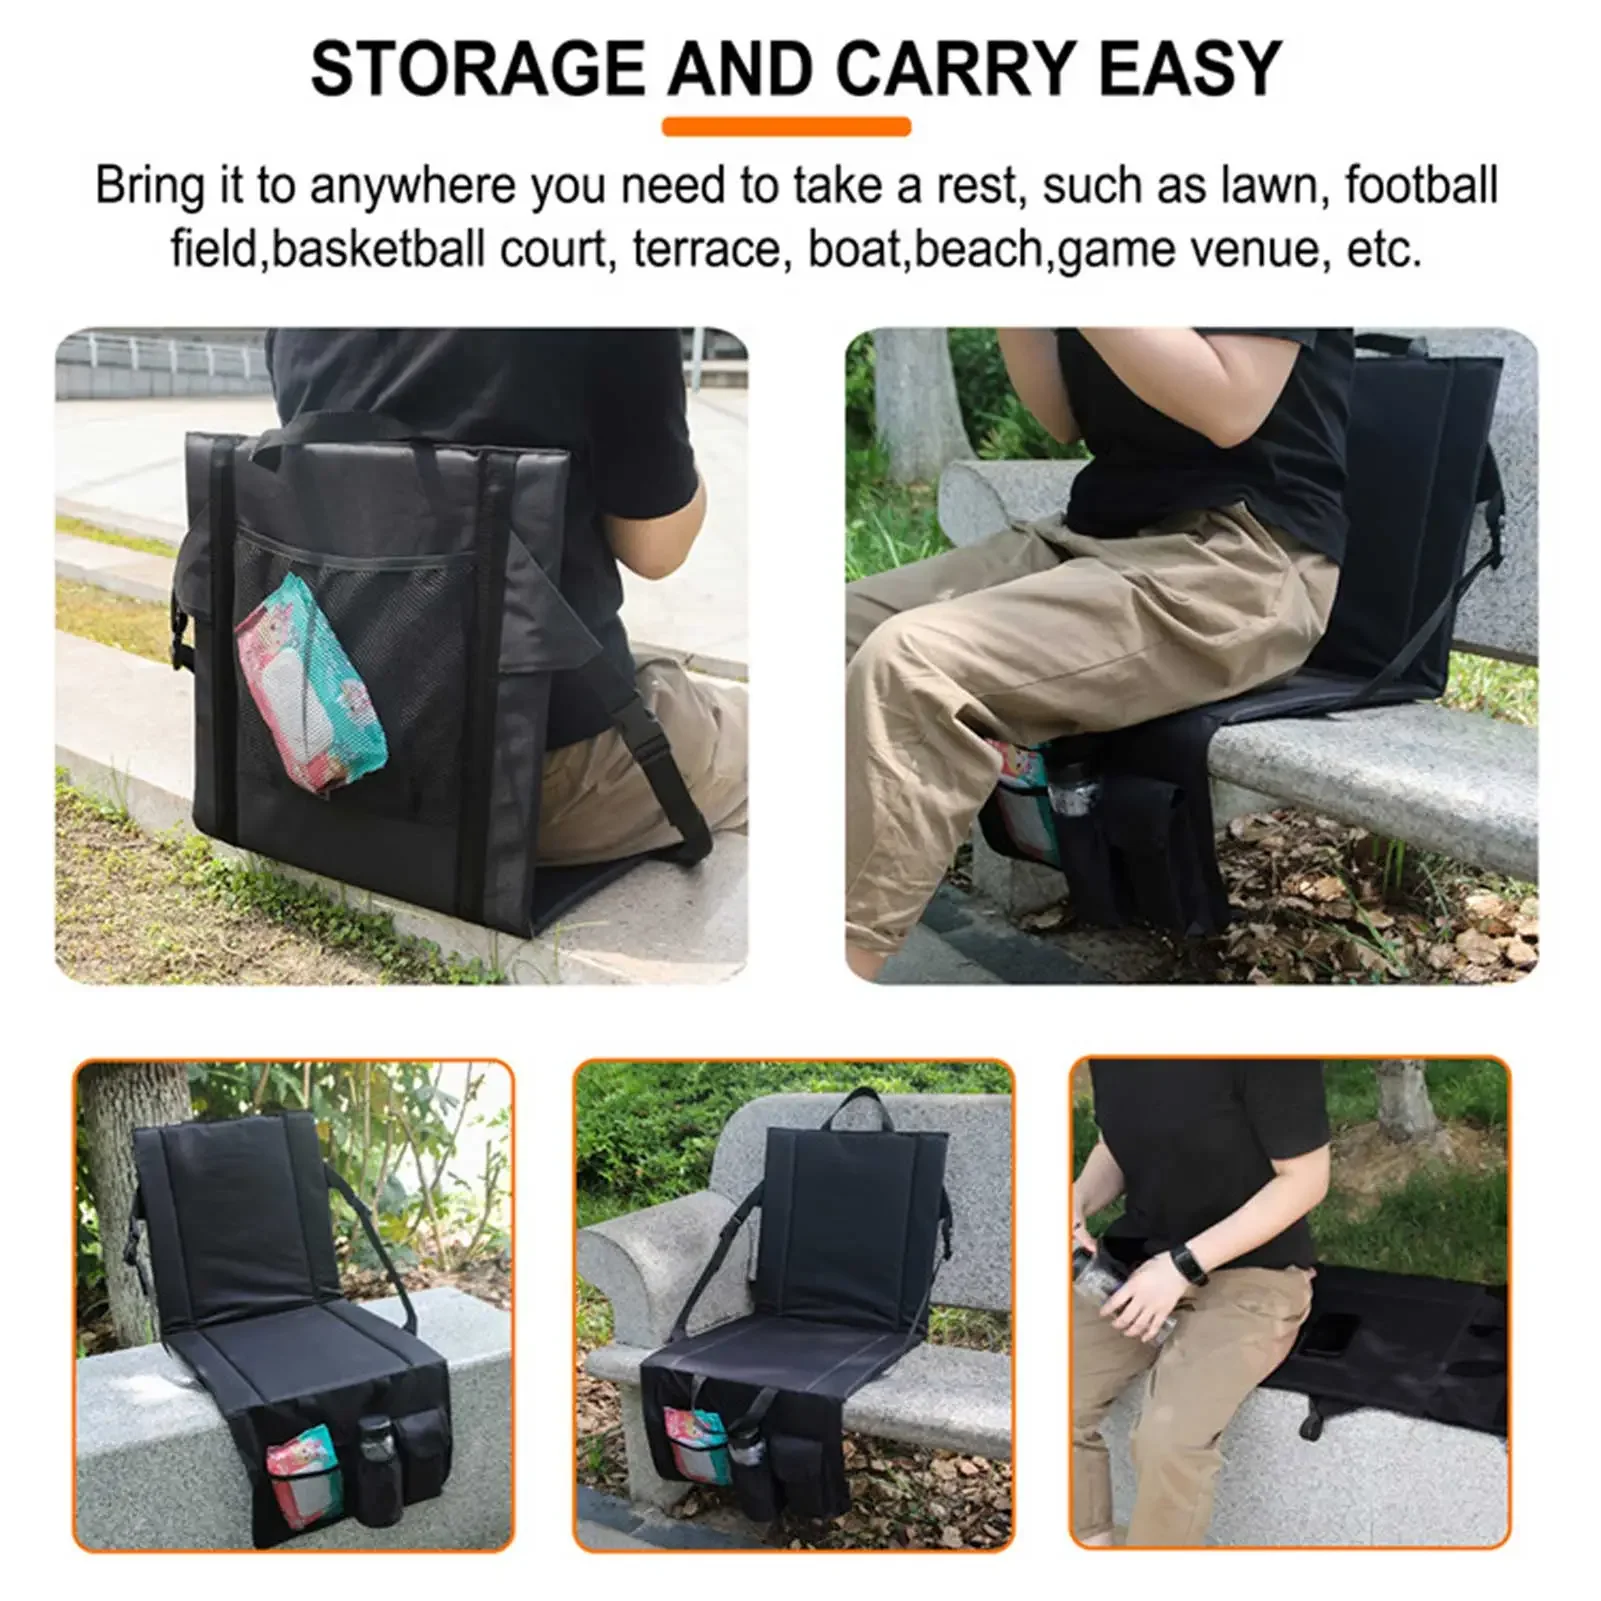 https://ae01.alicdn.com/kf/Sc67b9e70c44046e08428e9204defacd8z/Cushion-Pad-Foldable-Portable-Bleacher-Chair-With-4-Storage-Pockets-Ideal-Stadium-Chair-Seat-Cushion-For.jpg